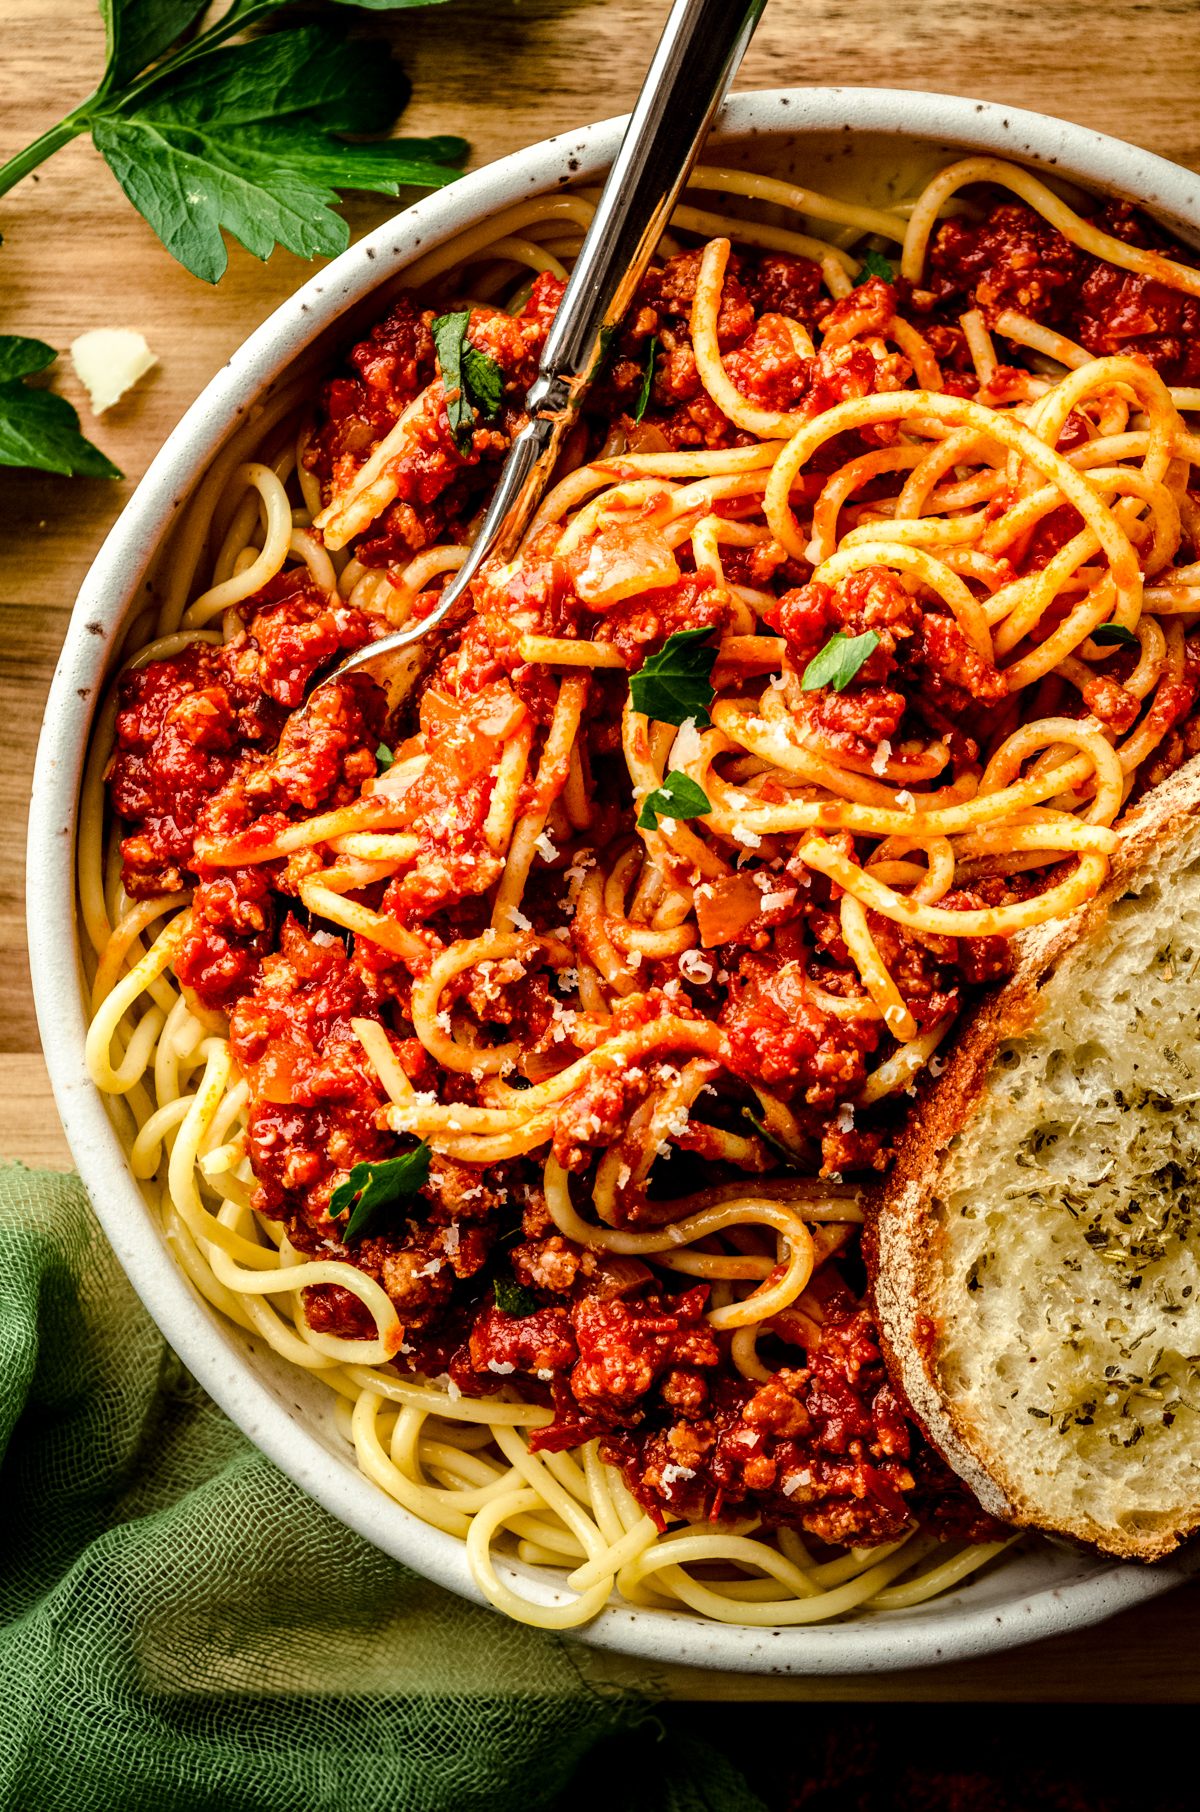 Aerial photo of a bowl of pasta with homemade meat sauce on it. There is a fork in the bowl as well as a slice of garlic bread.